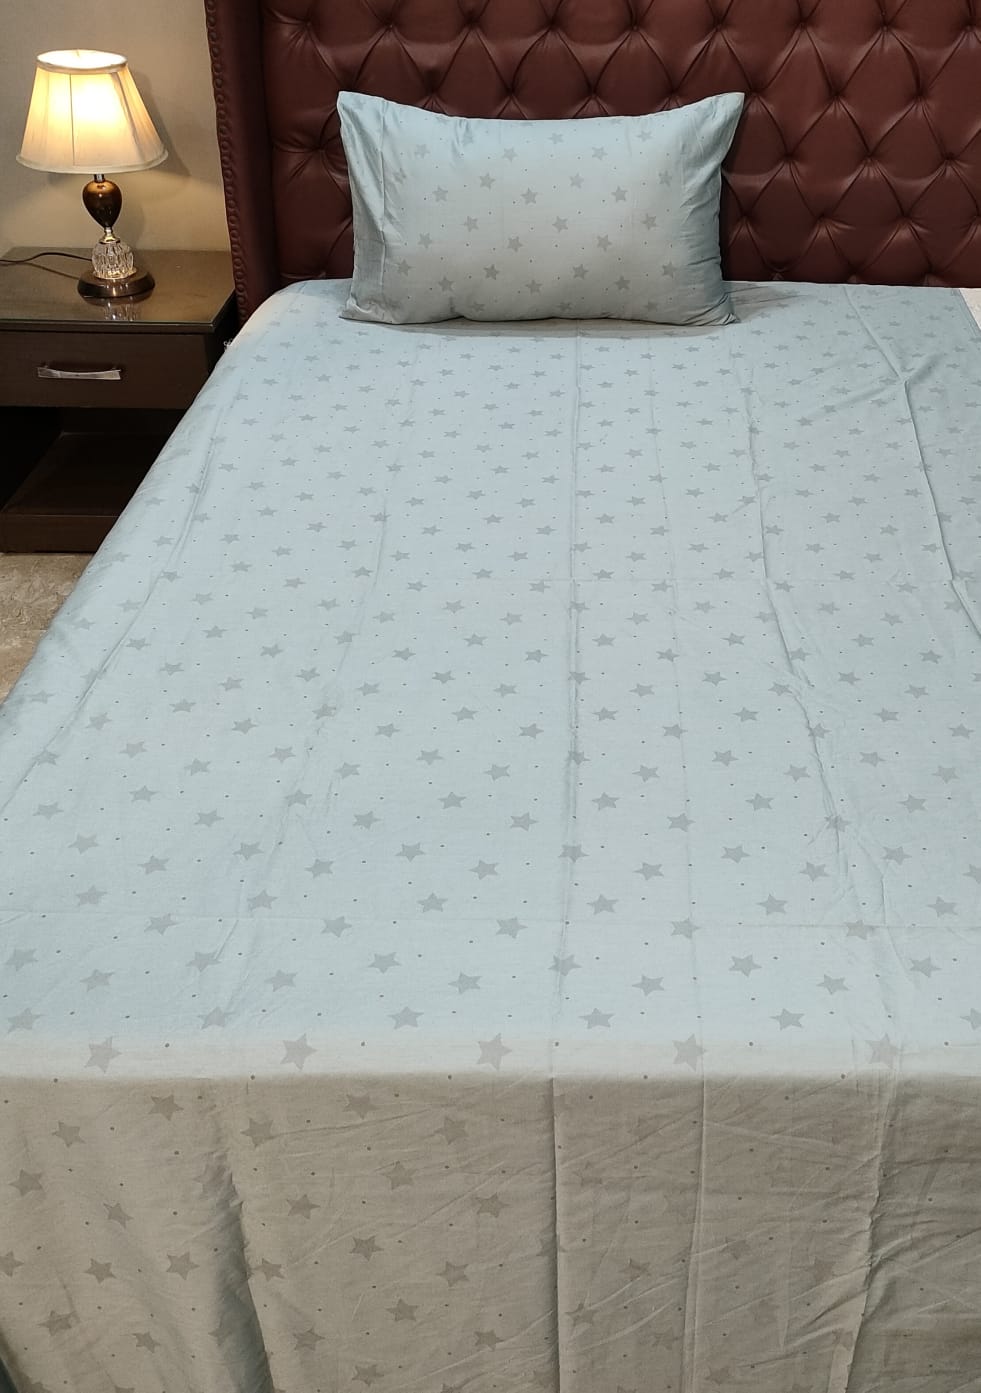 Star Glow in the dark Bed Sheets